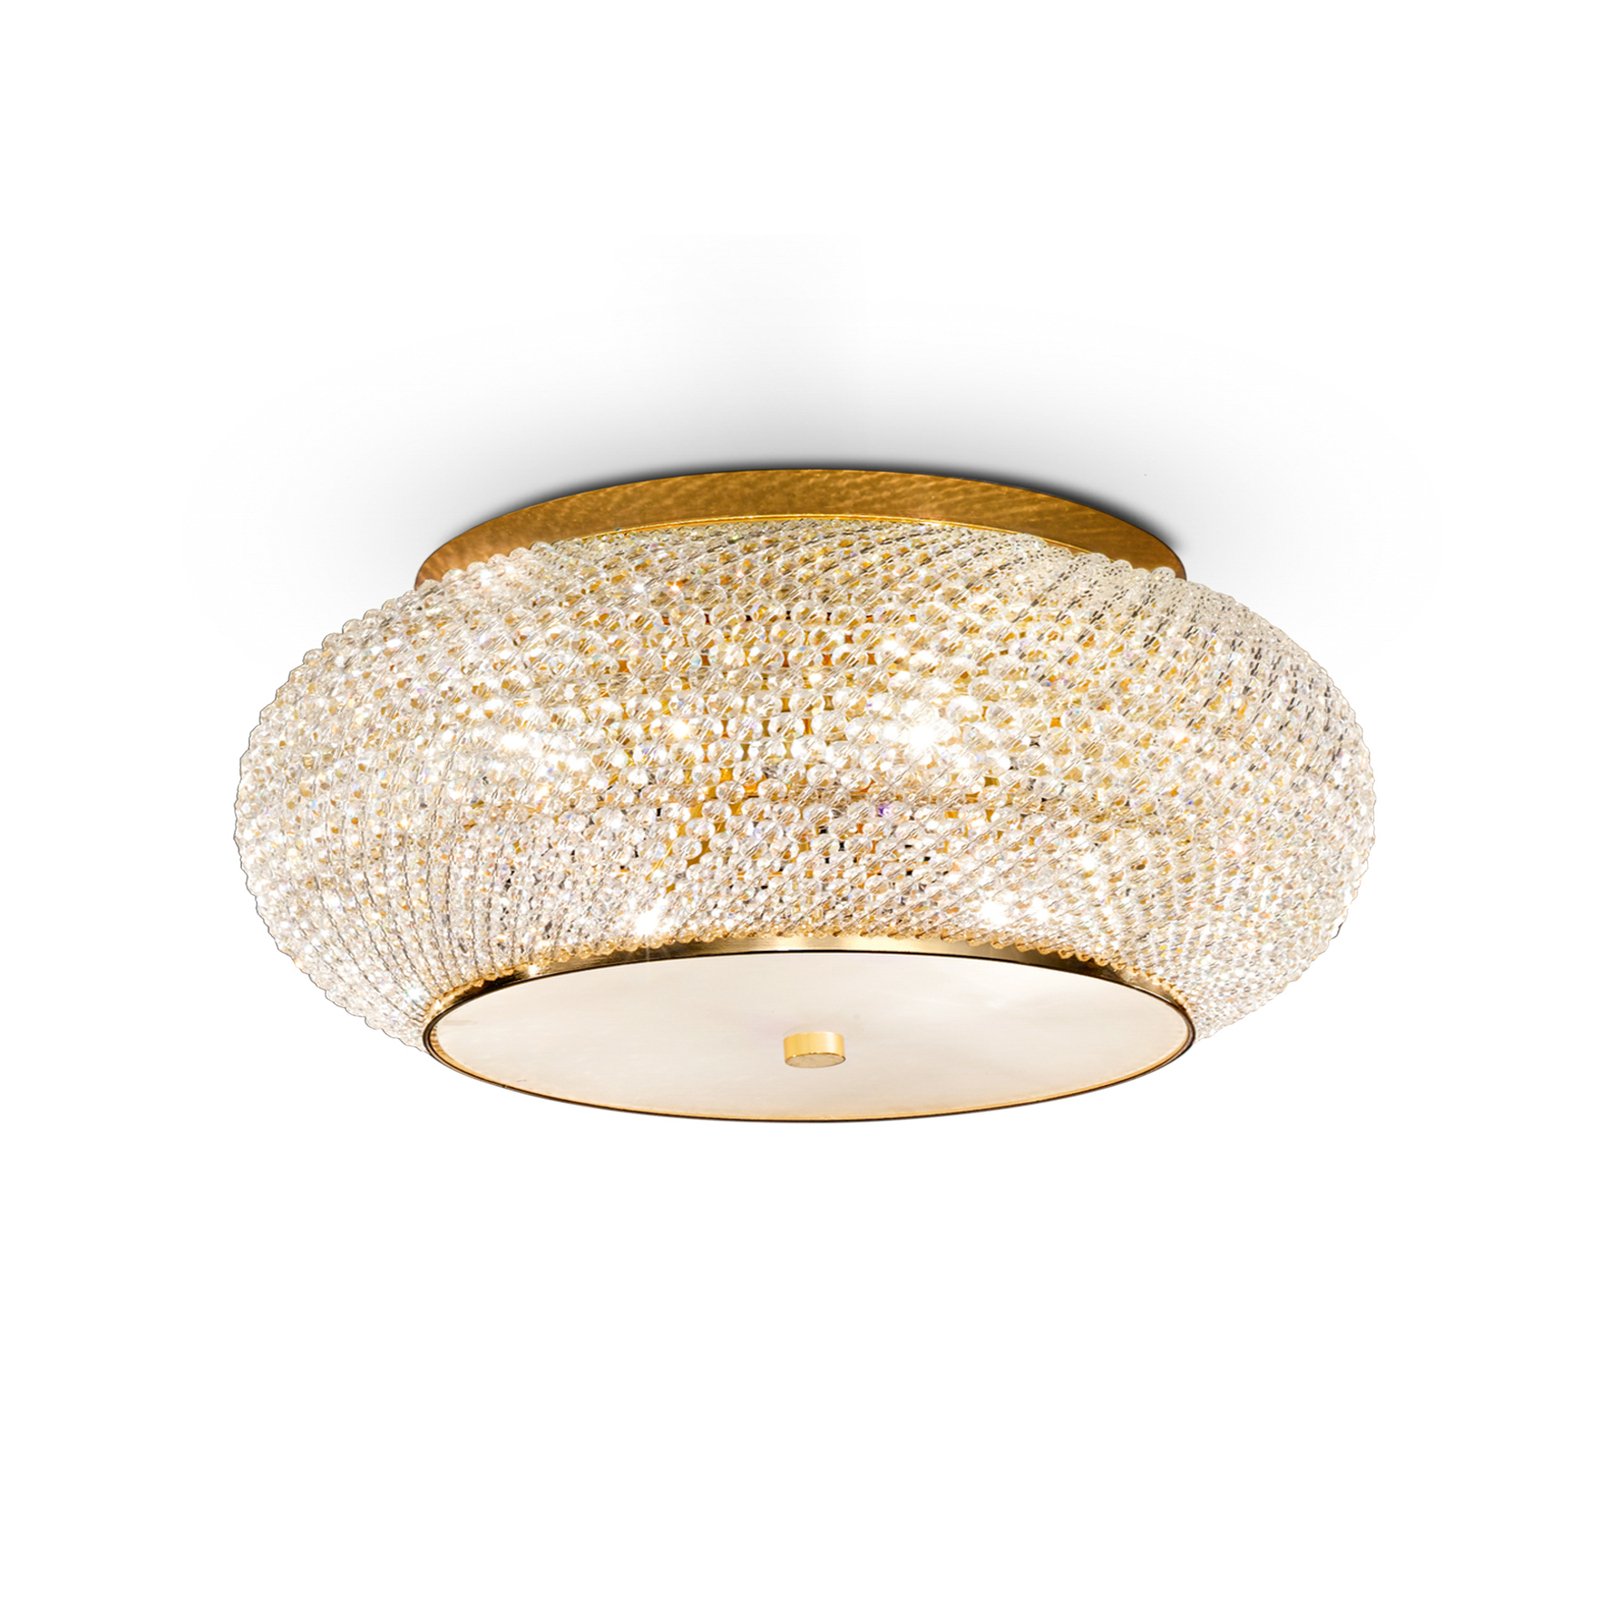 Ideal Lux Pasha ceiling light, gold-coloured, crystal, Ø 55 cm